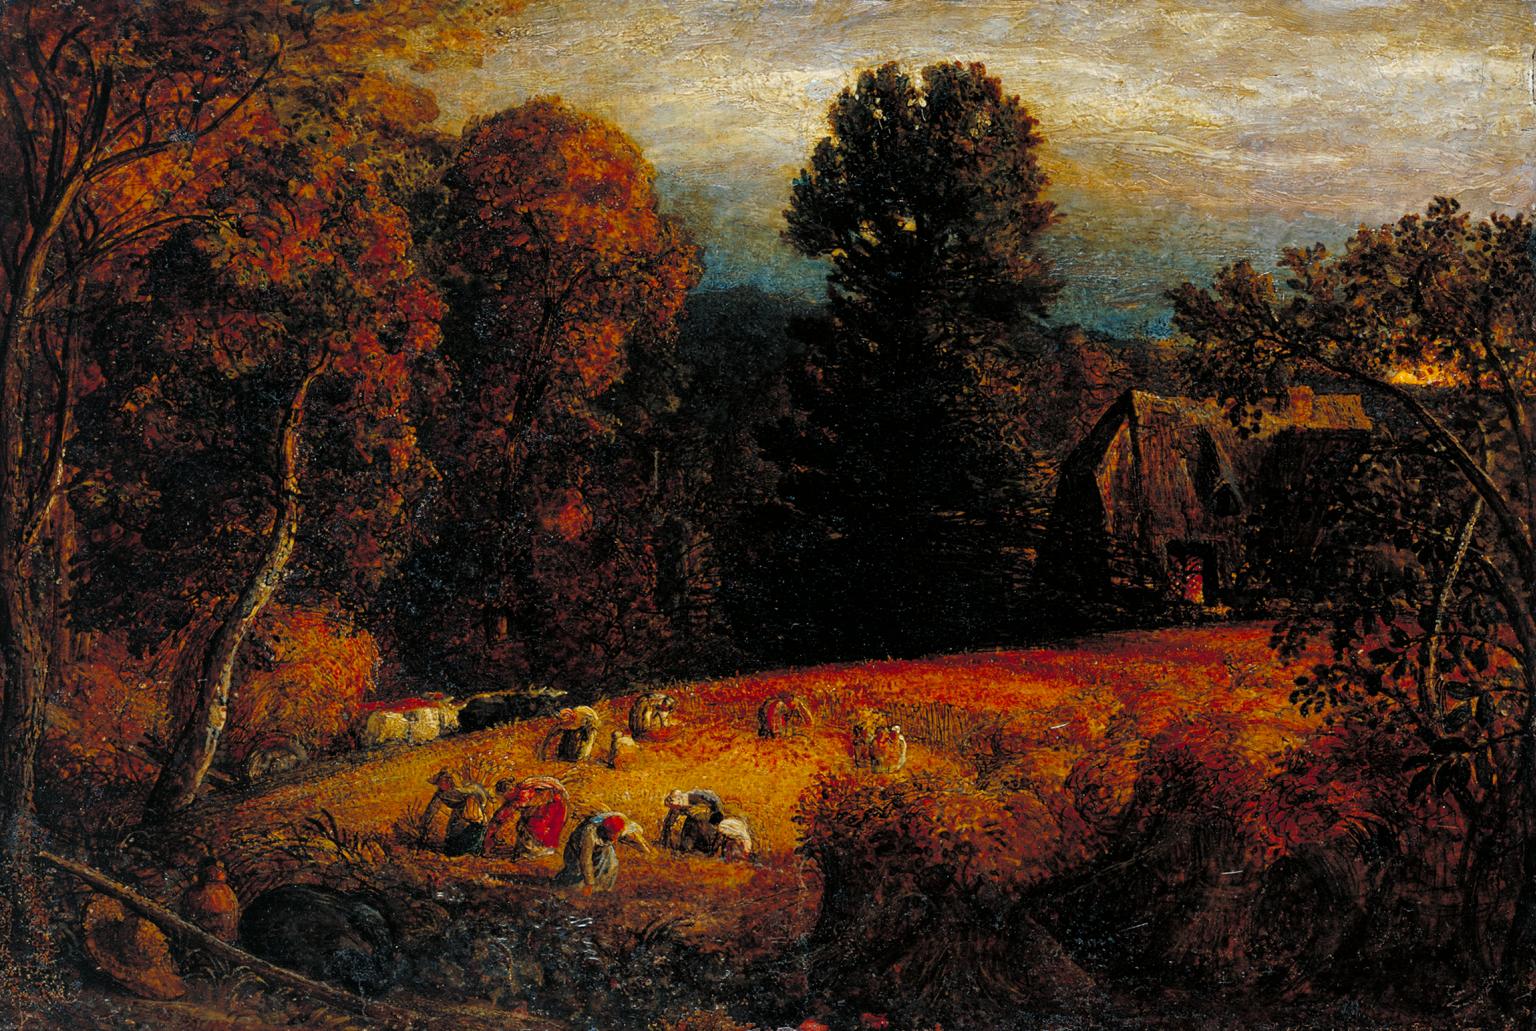 Old colourful painting with people picking crops in a field under trees